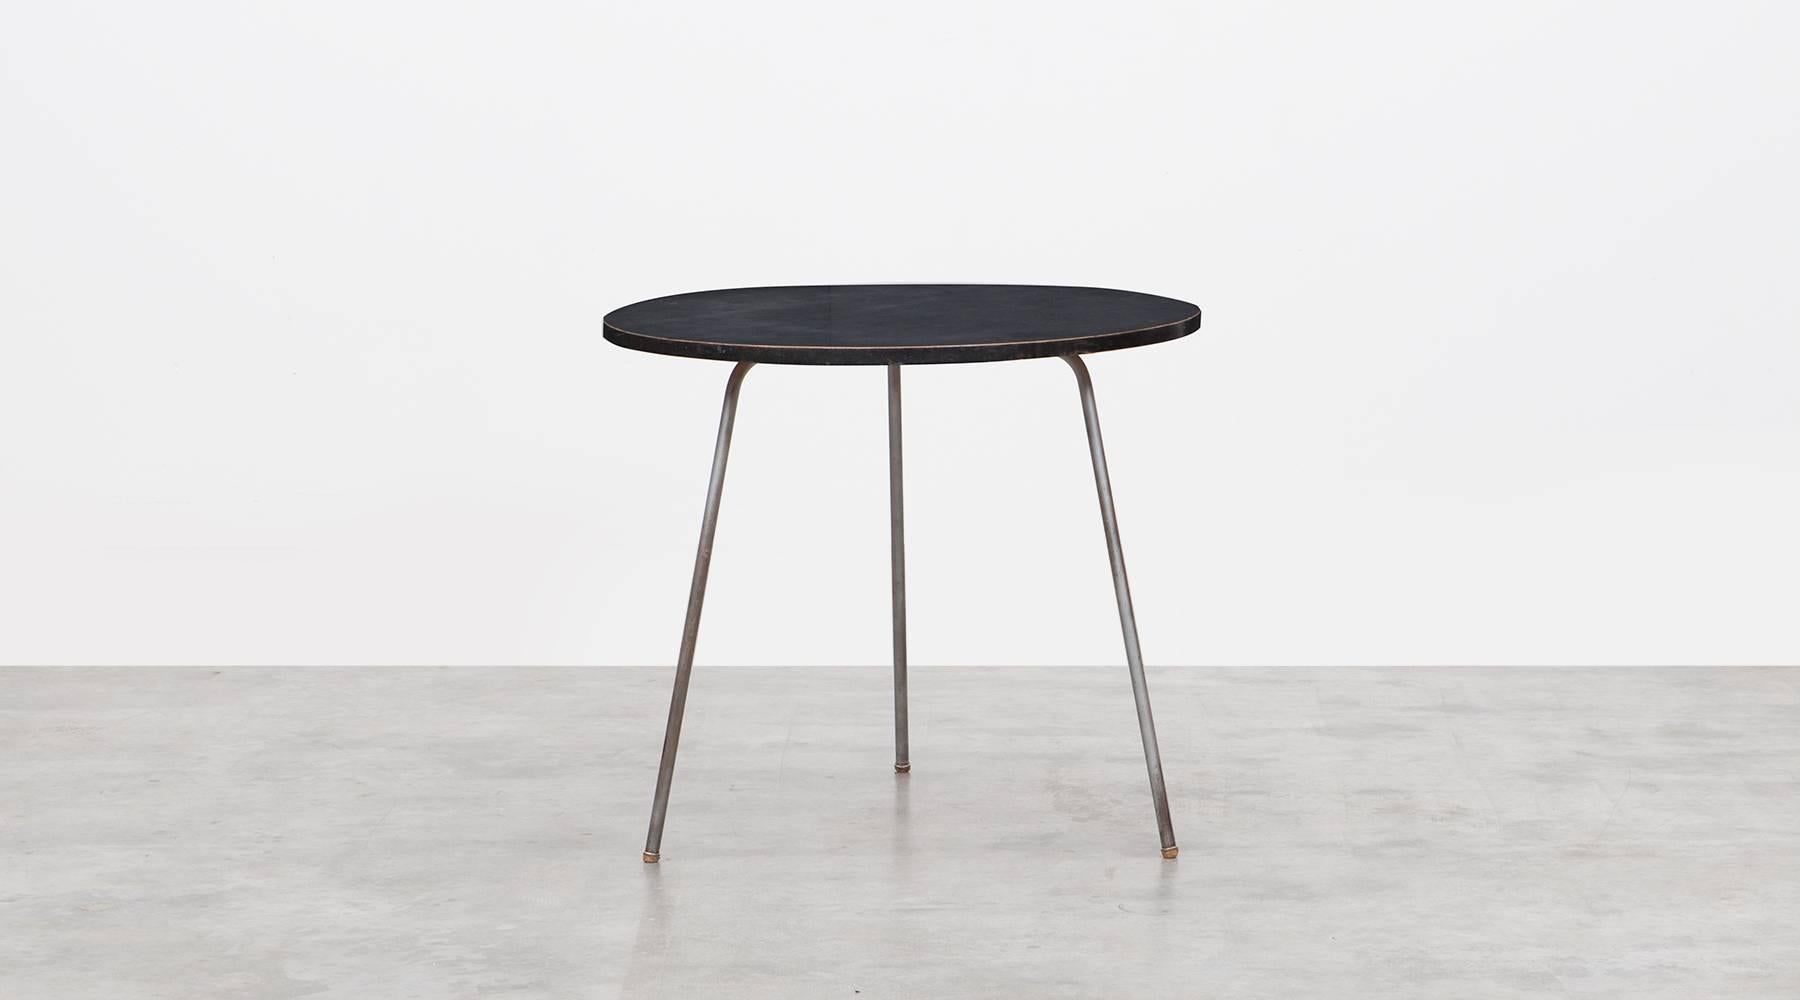 Side table designed by German Egon Eiermann with a wooden top and a metal base. Its simple design with the circular top and the three legs makes it so unique and special. This piece is usable for different living rooms. Manufactured by Wilde and